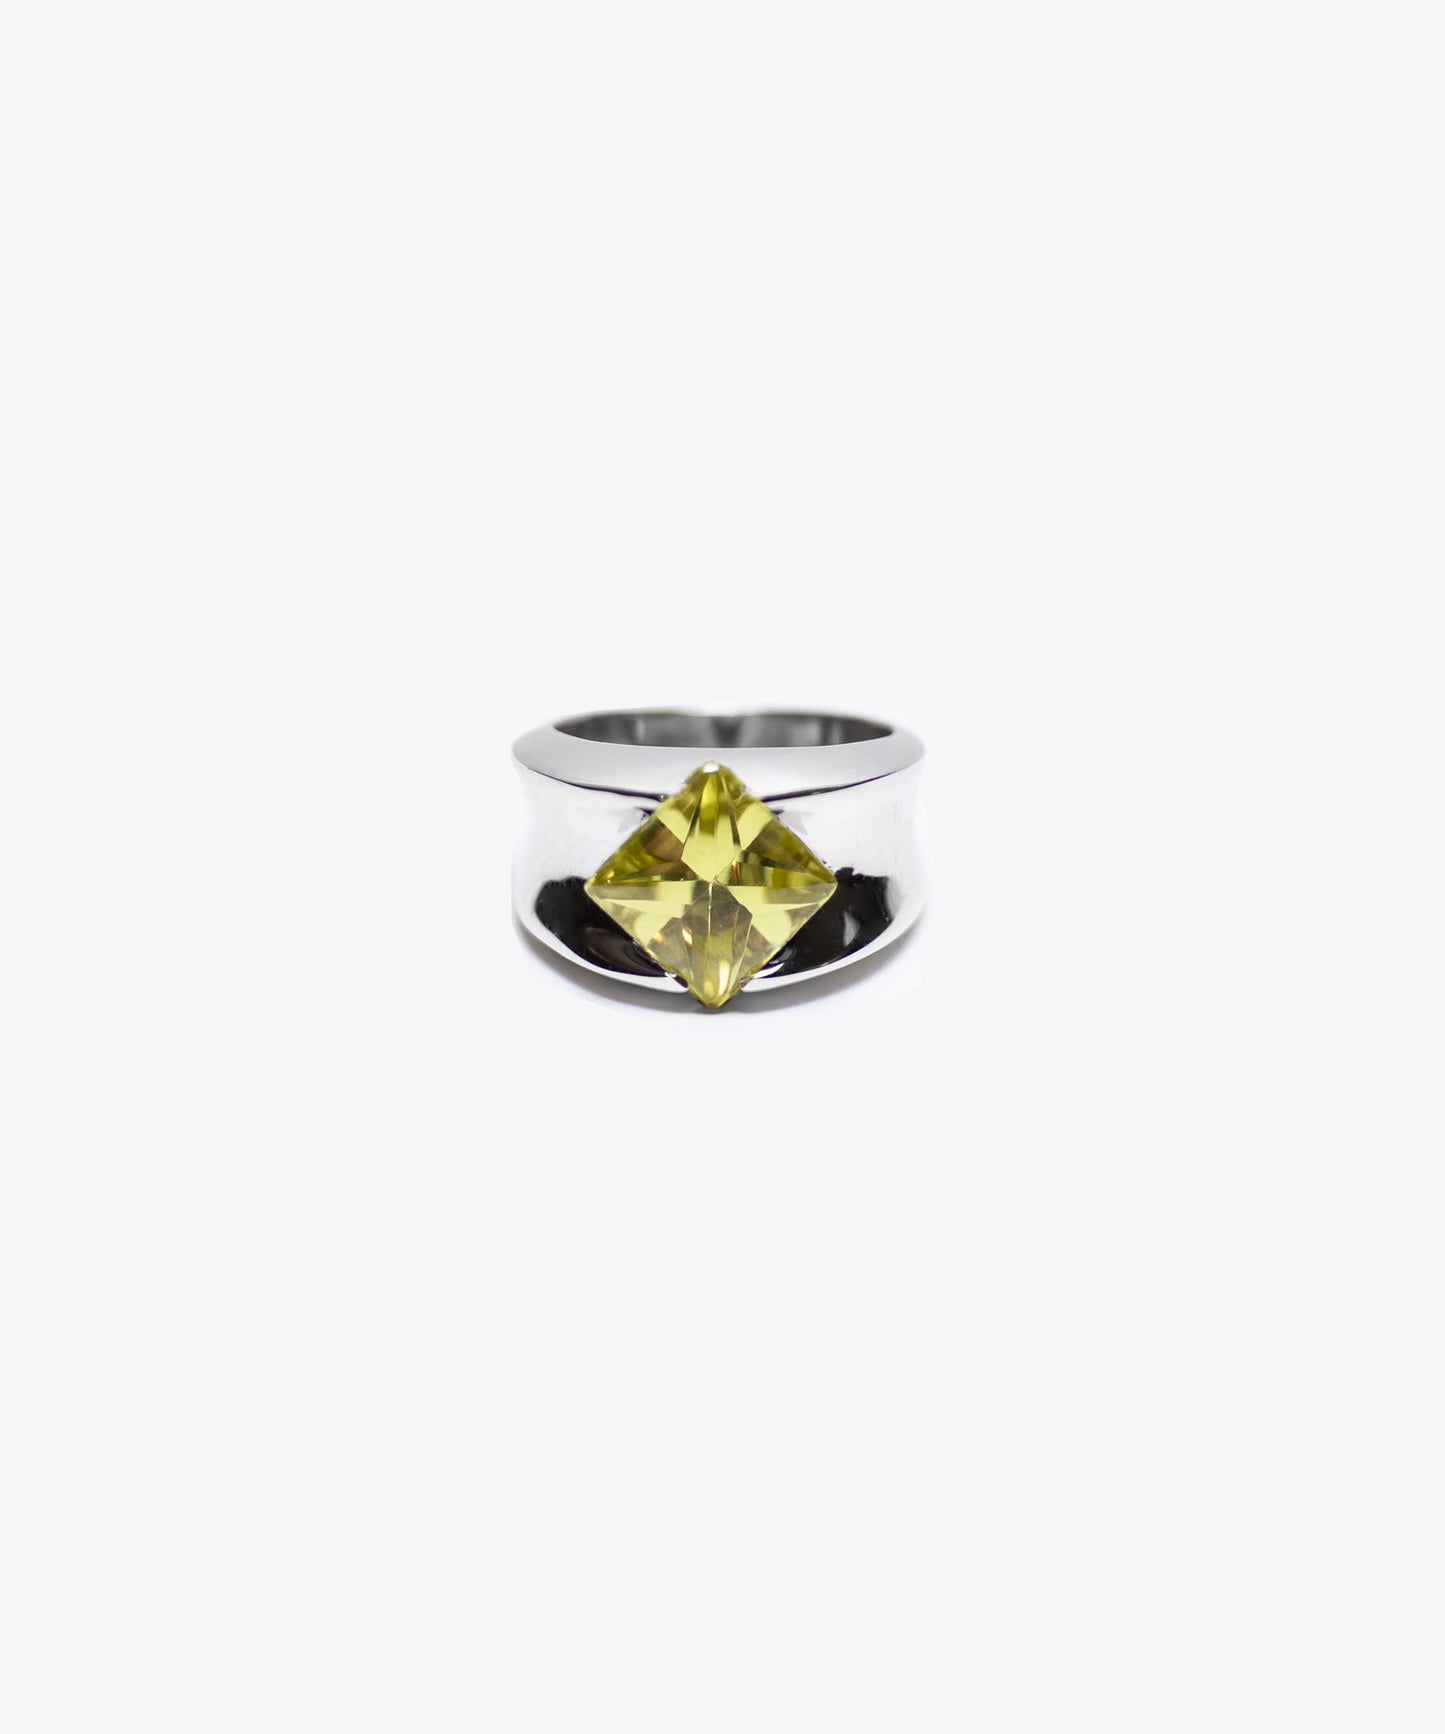 The Petro Chartreuse Ring